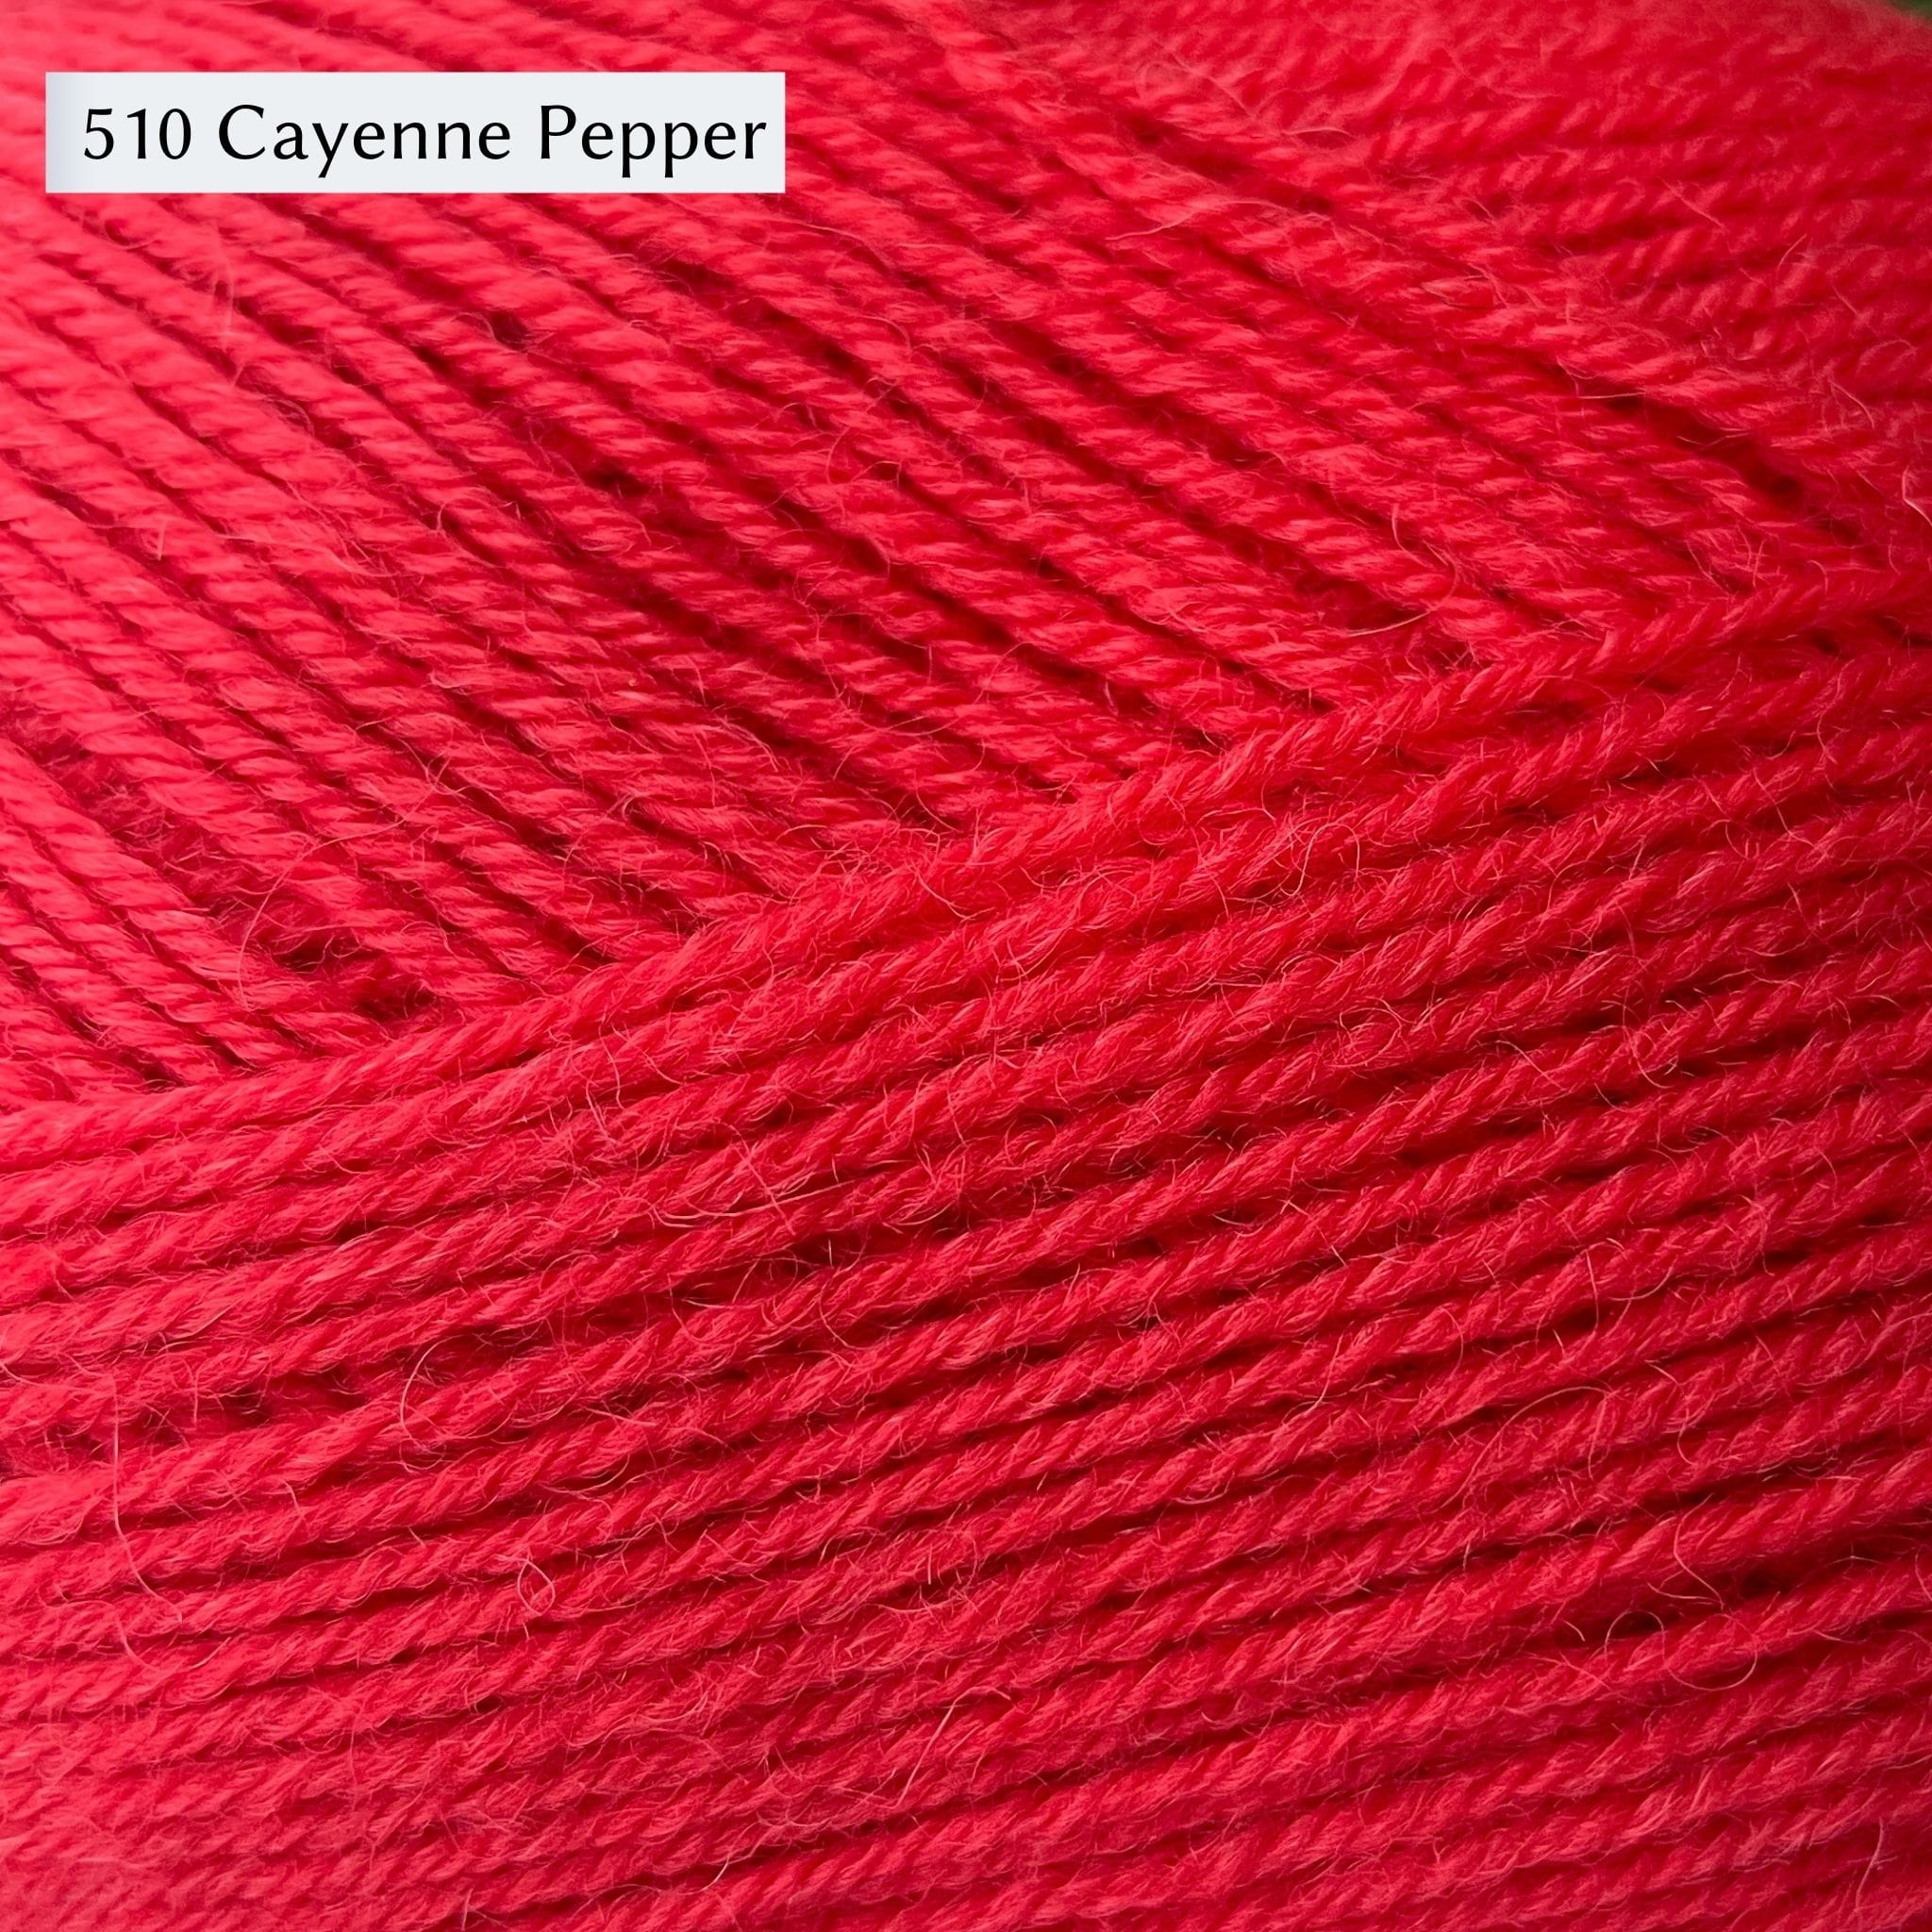 West Yorkshire Spinners Signature 4ply yarn, 100-gram ball, fingering weight, in color 510 Cayenne Pepper, a bright orange-leaning red